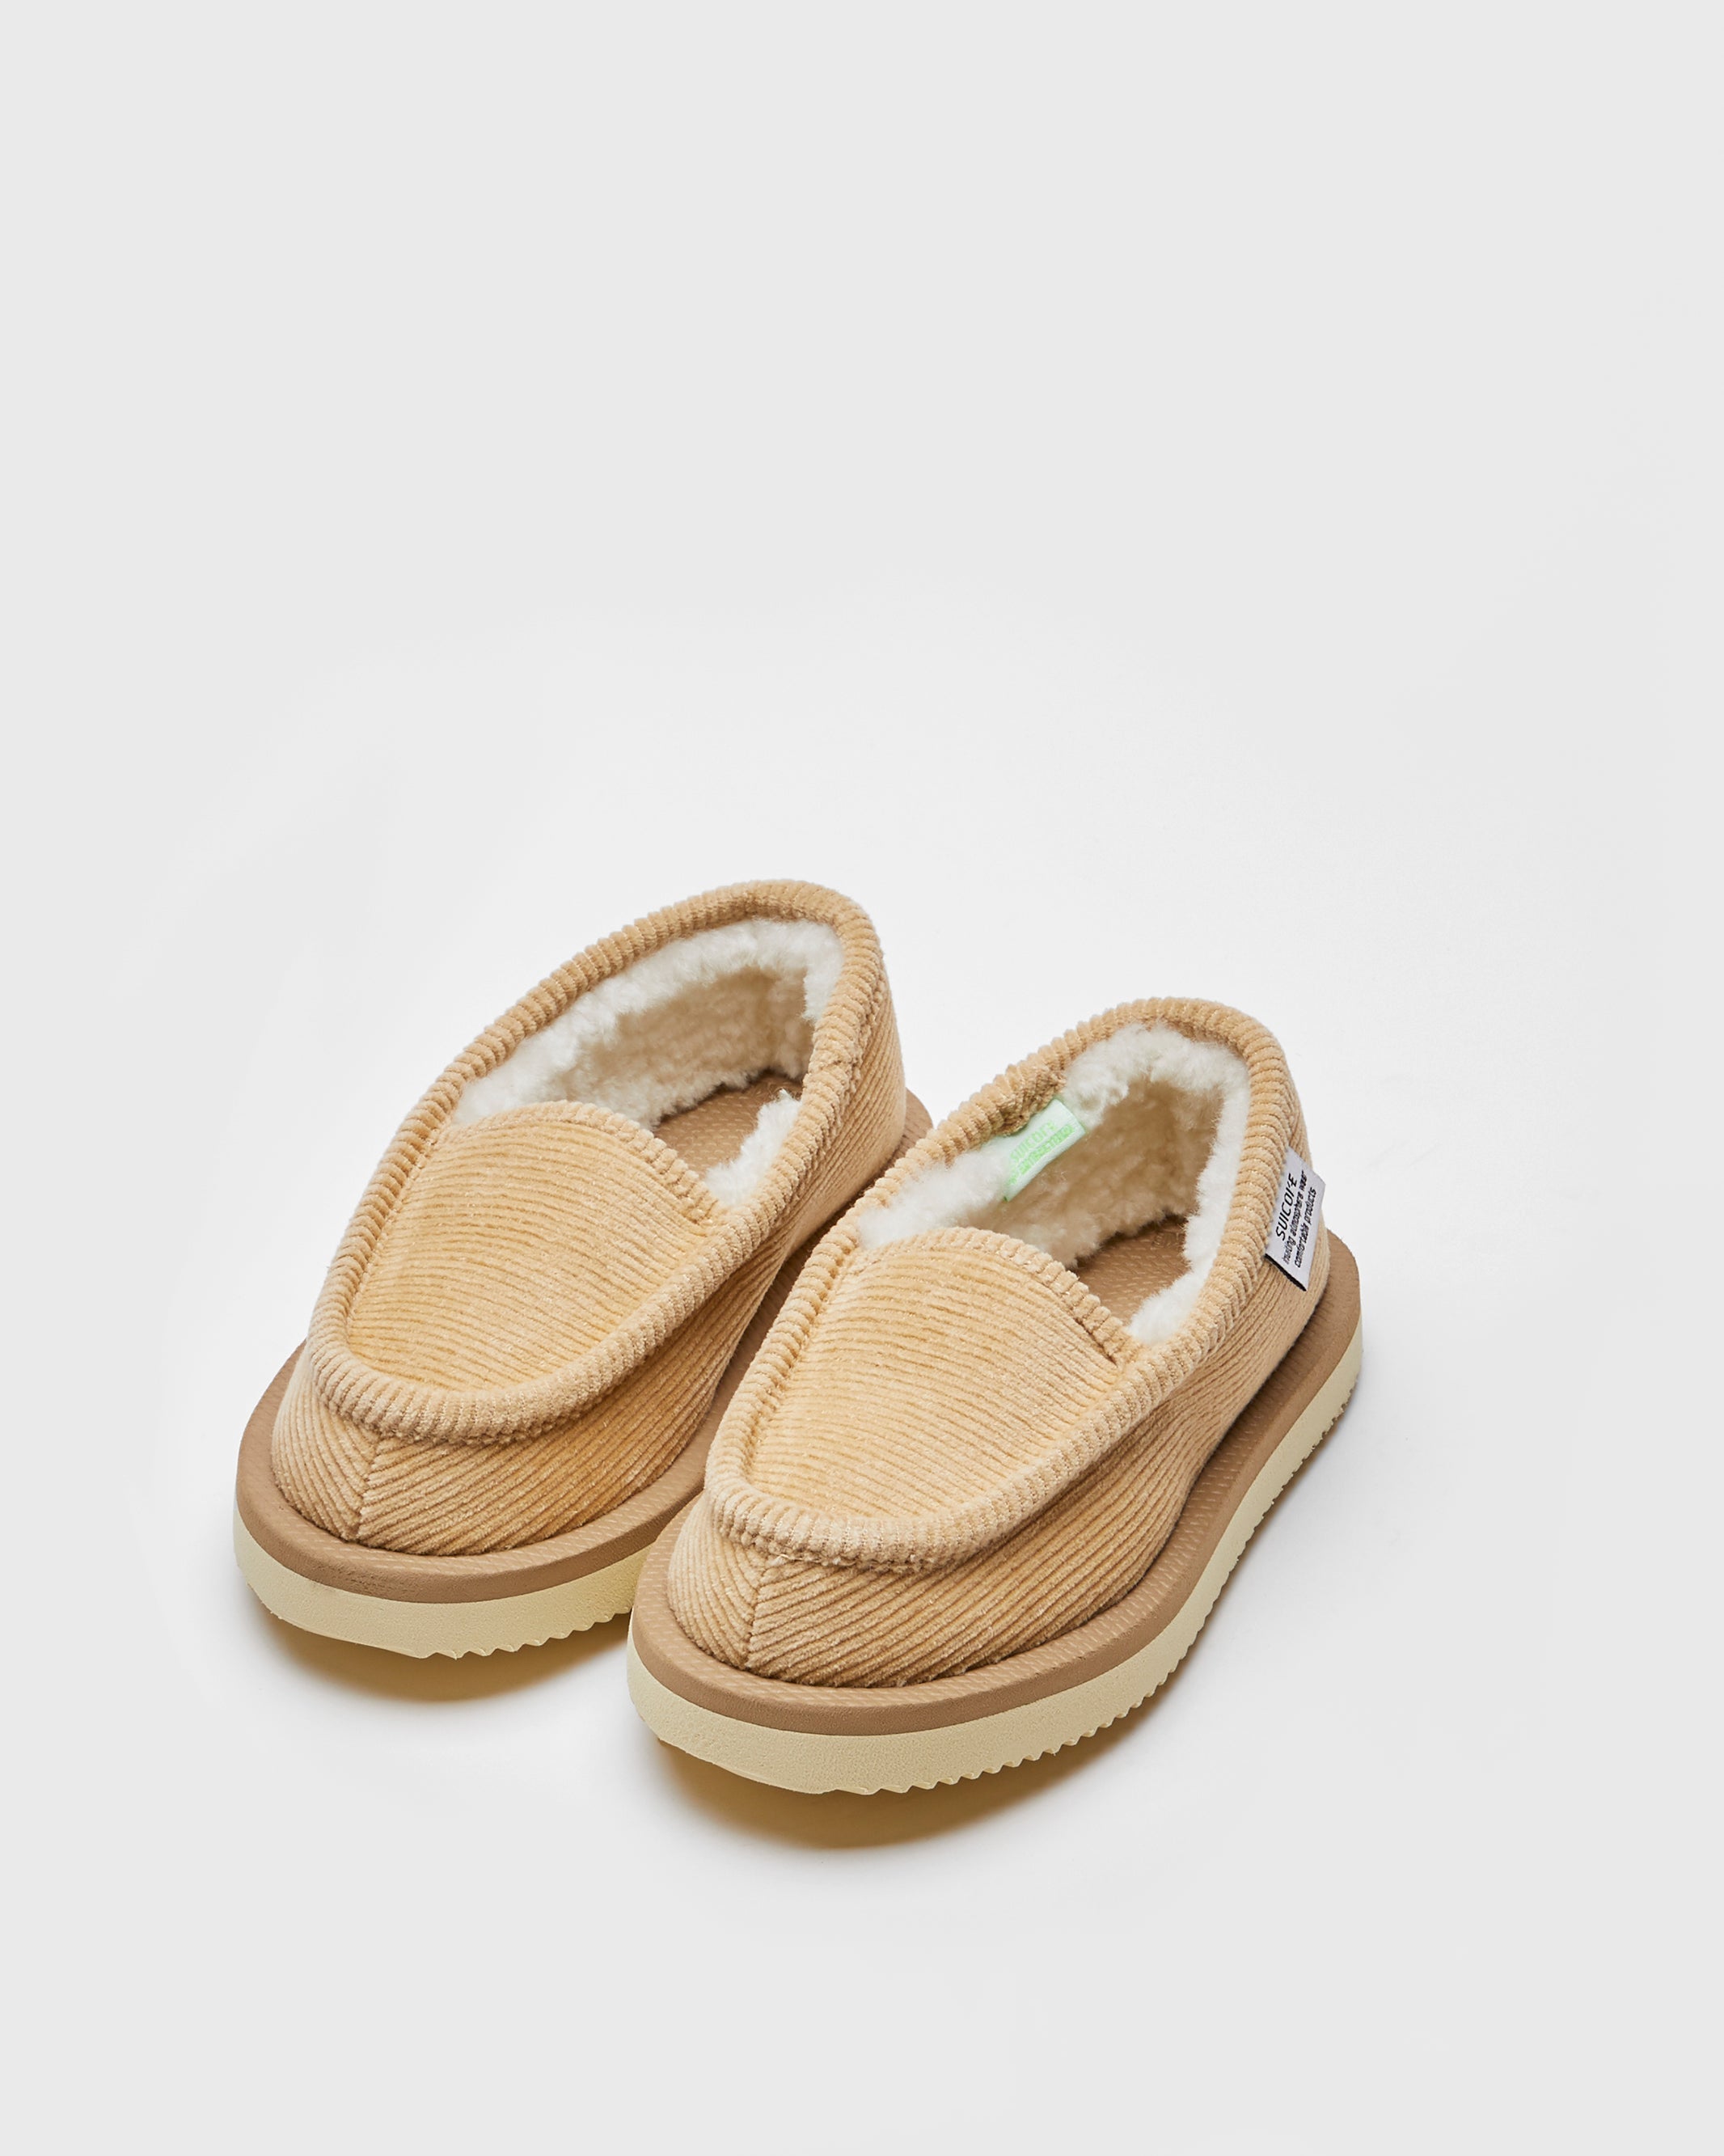 SUICOKE SSD-CoMabKIDS in Beige OG-105COMABKIDS | Shop from eightywingold an official brand partner for SUICOKE Canada and US.